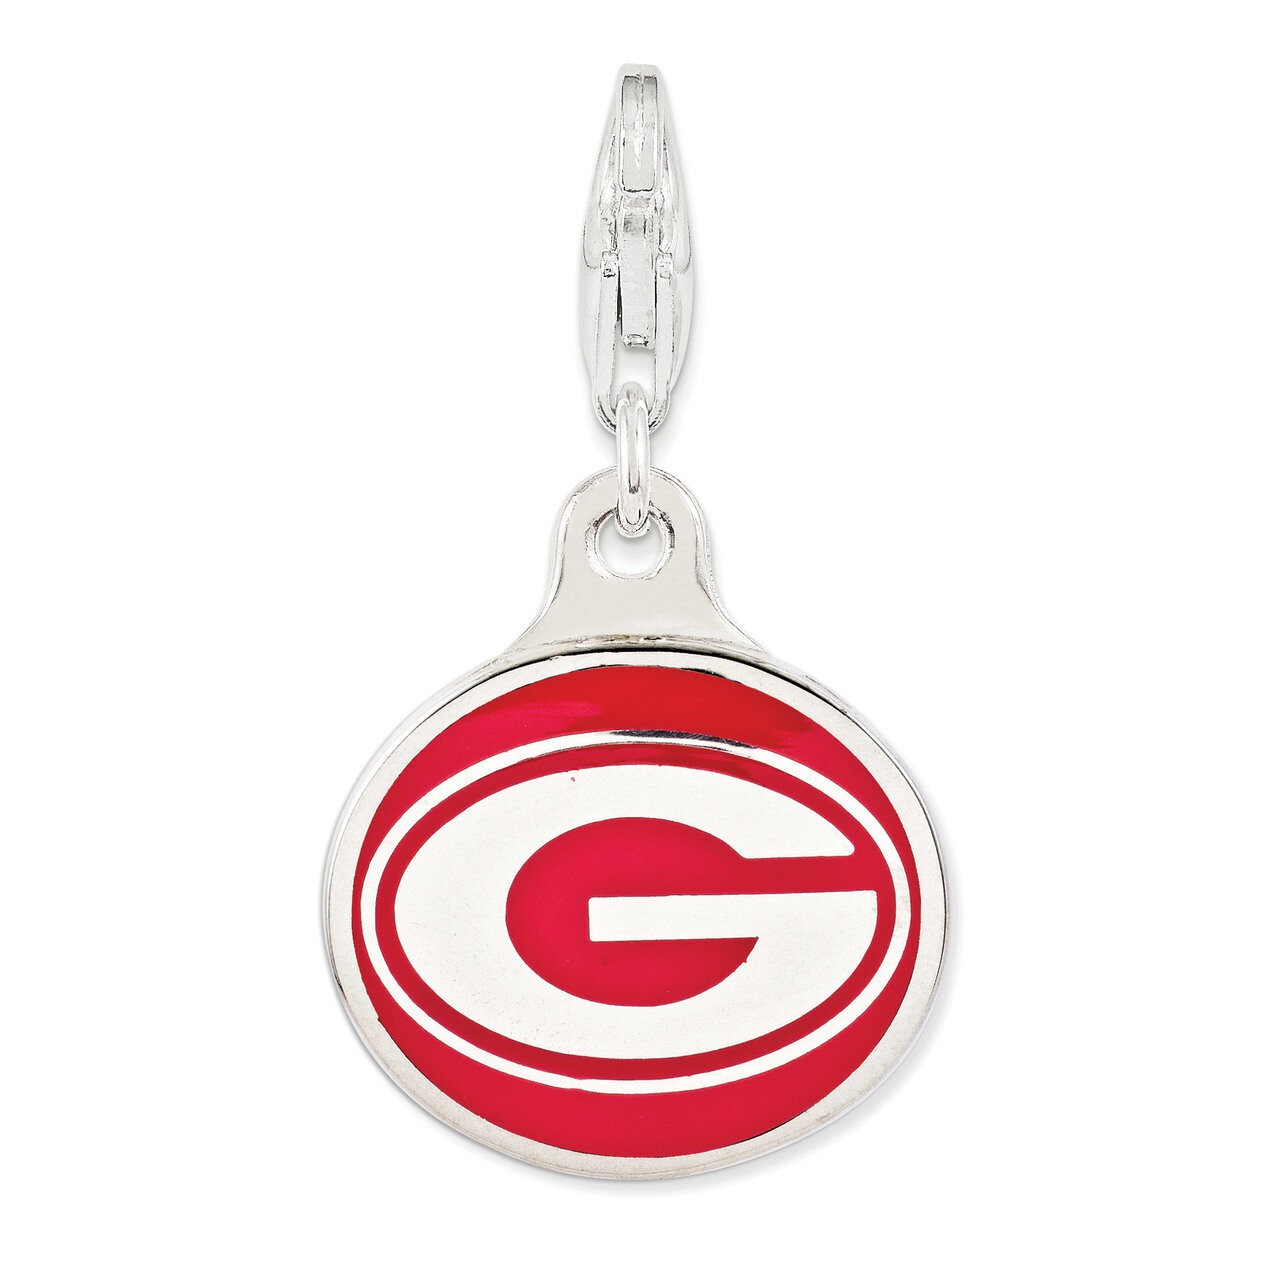 Enamel University of Georgia with Lobster Clasp Charm Sterling Silver QCC1124